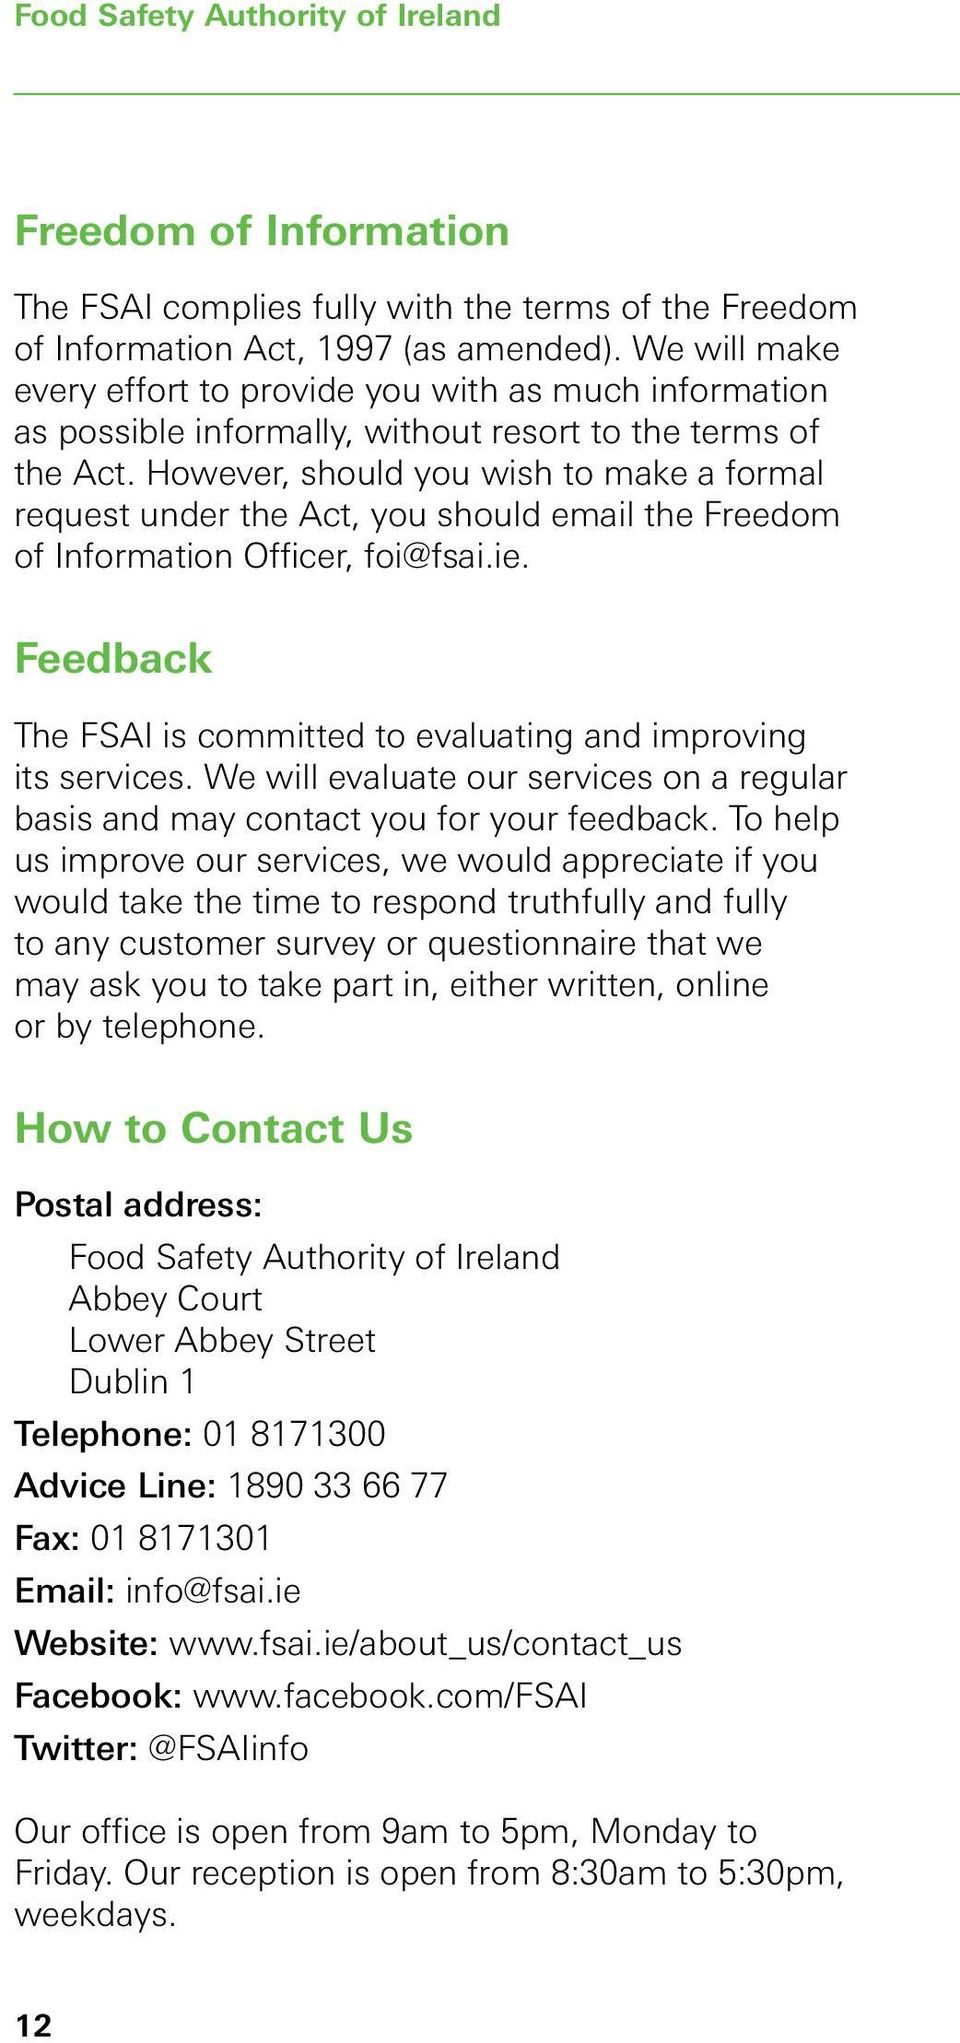 However, should you wish to make a formal request under the Act, you should email the Freedom of Information Officer, foi@fsai.ie.